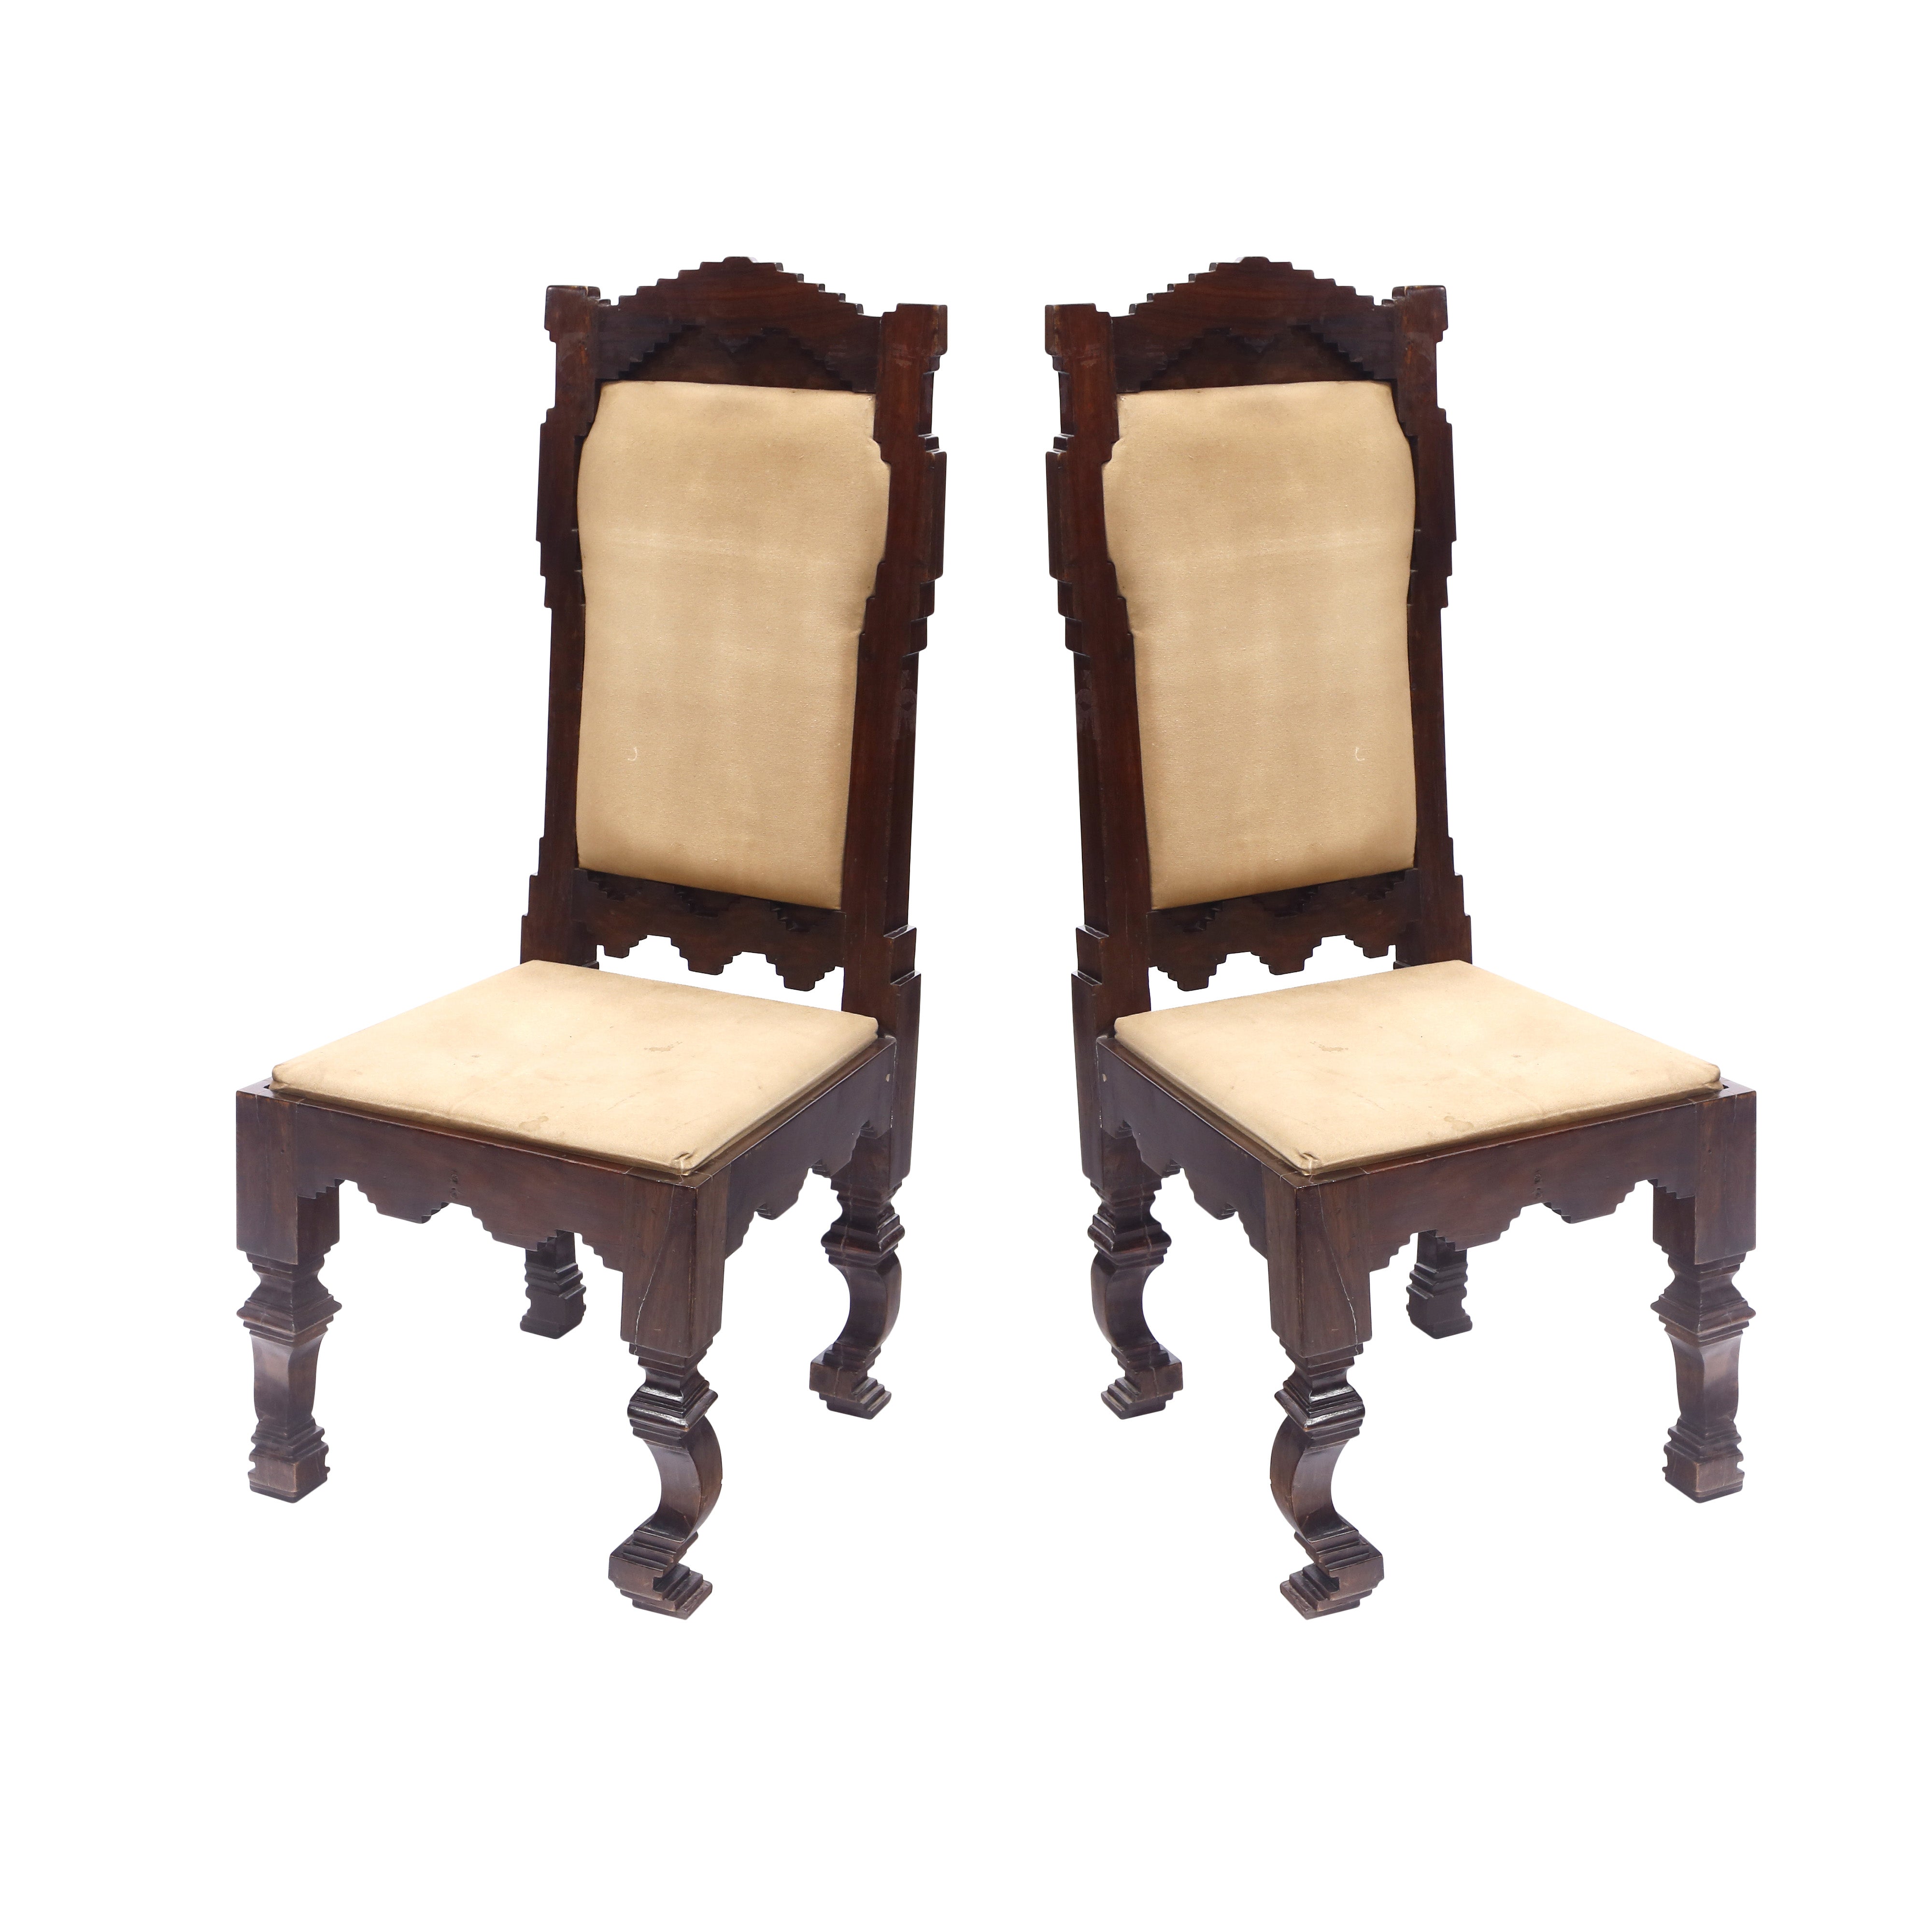 (Set of 2) Simple Mystify Chair Dining Chair